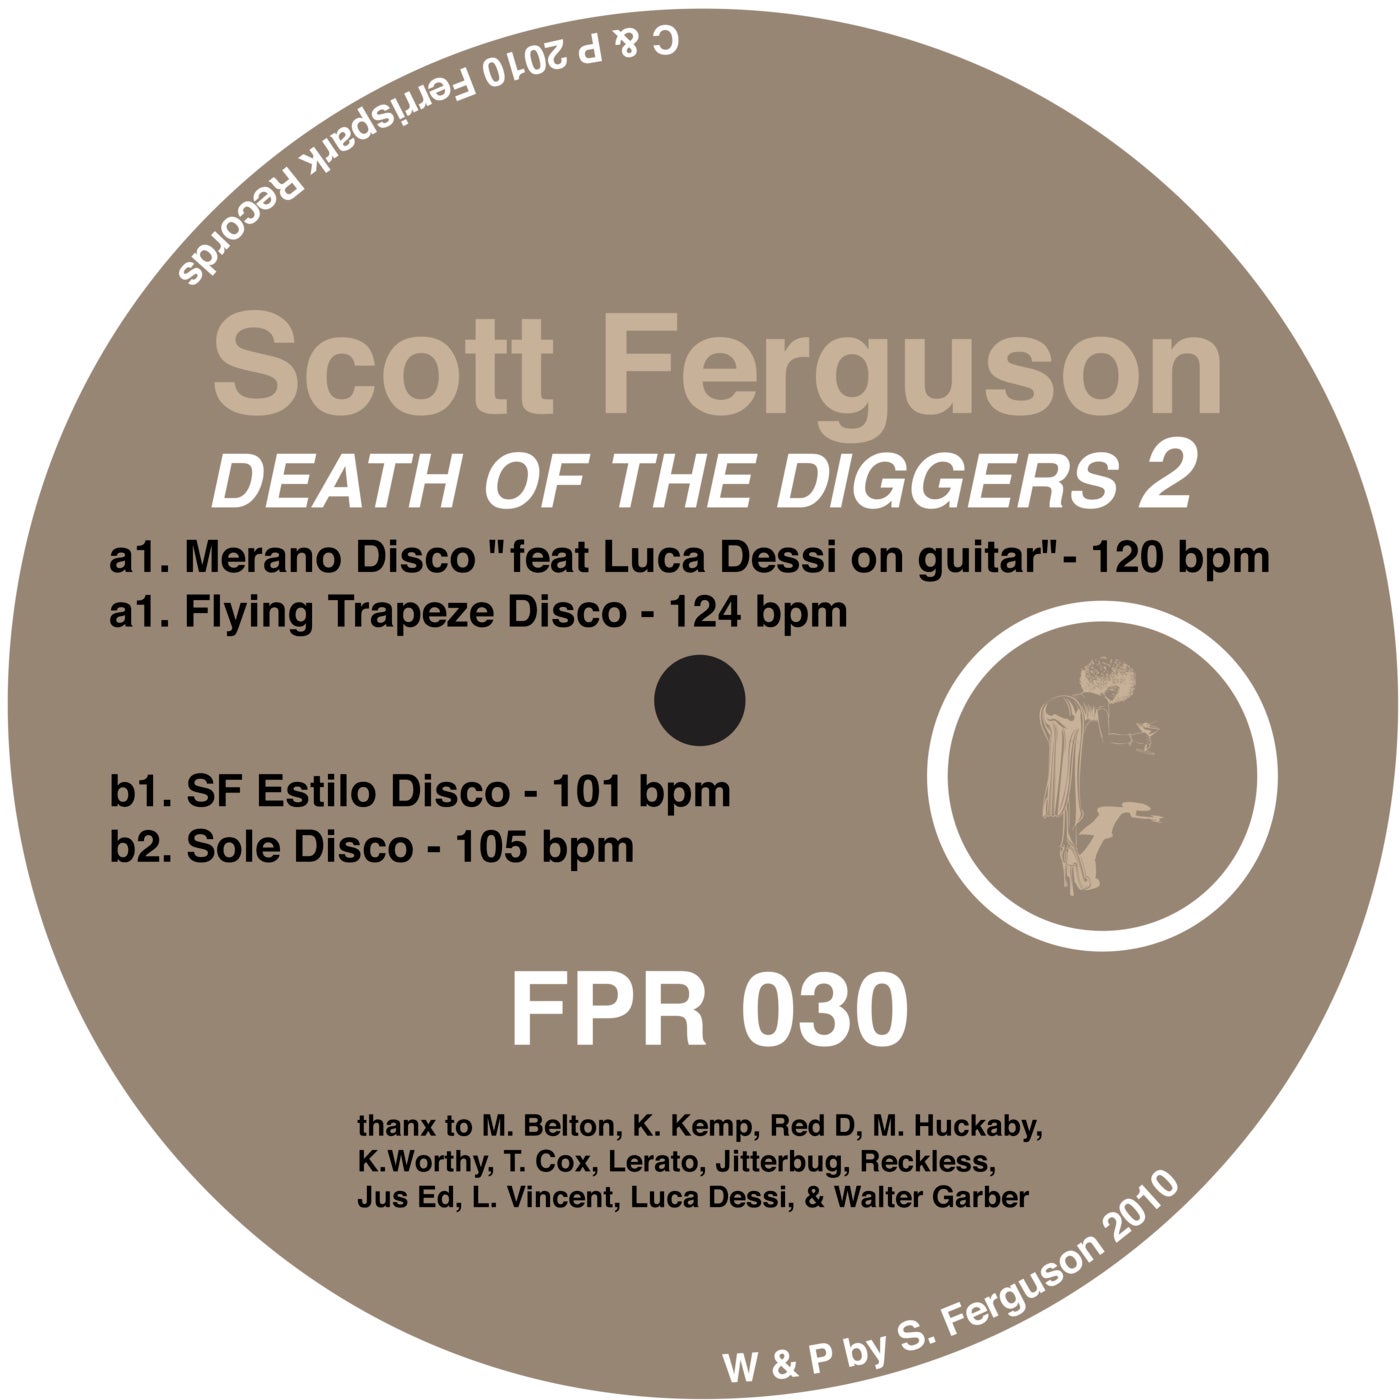 Death of the Diggers 2